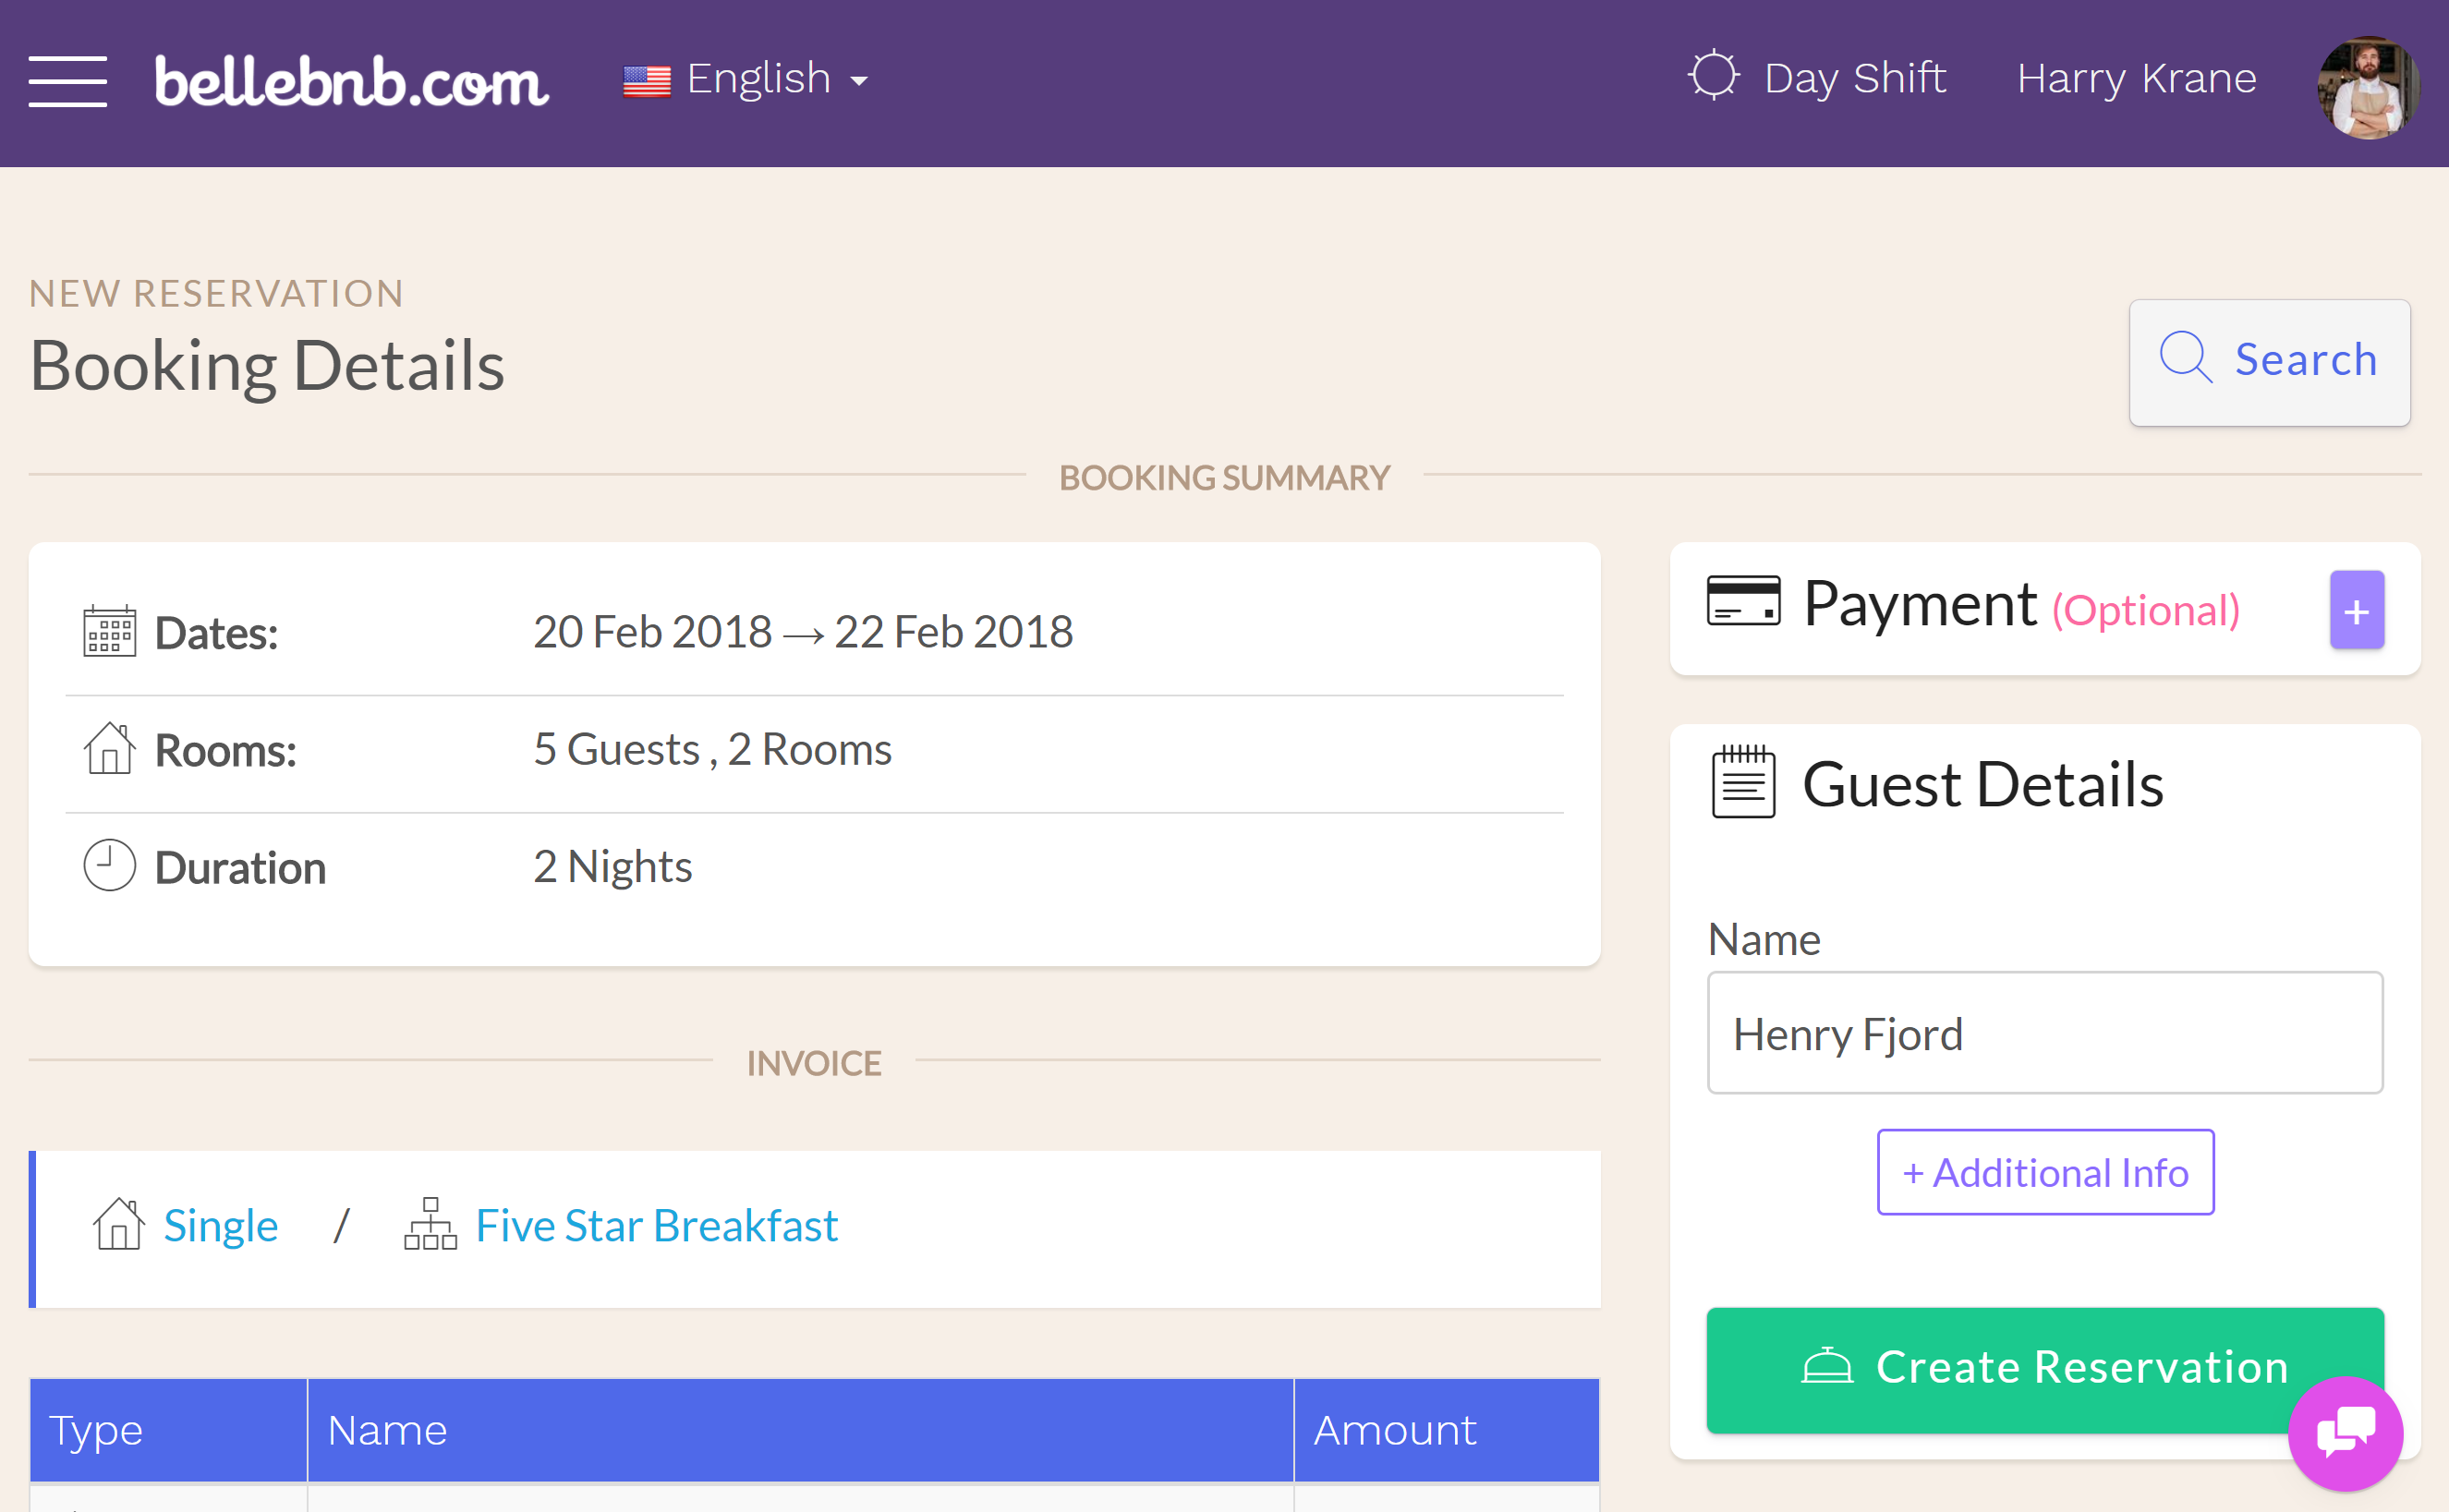 You can see the additional rooms for the reservation in the ‘Booking Summary’ section of the reservation details for the main room. The additional rooms will link back to the main room for the group.